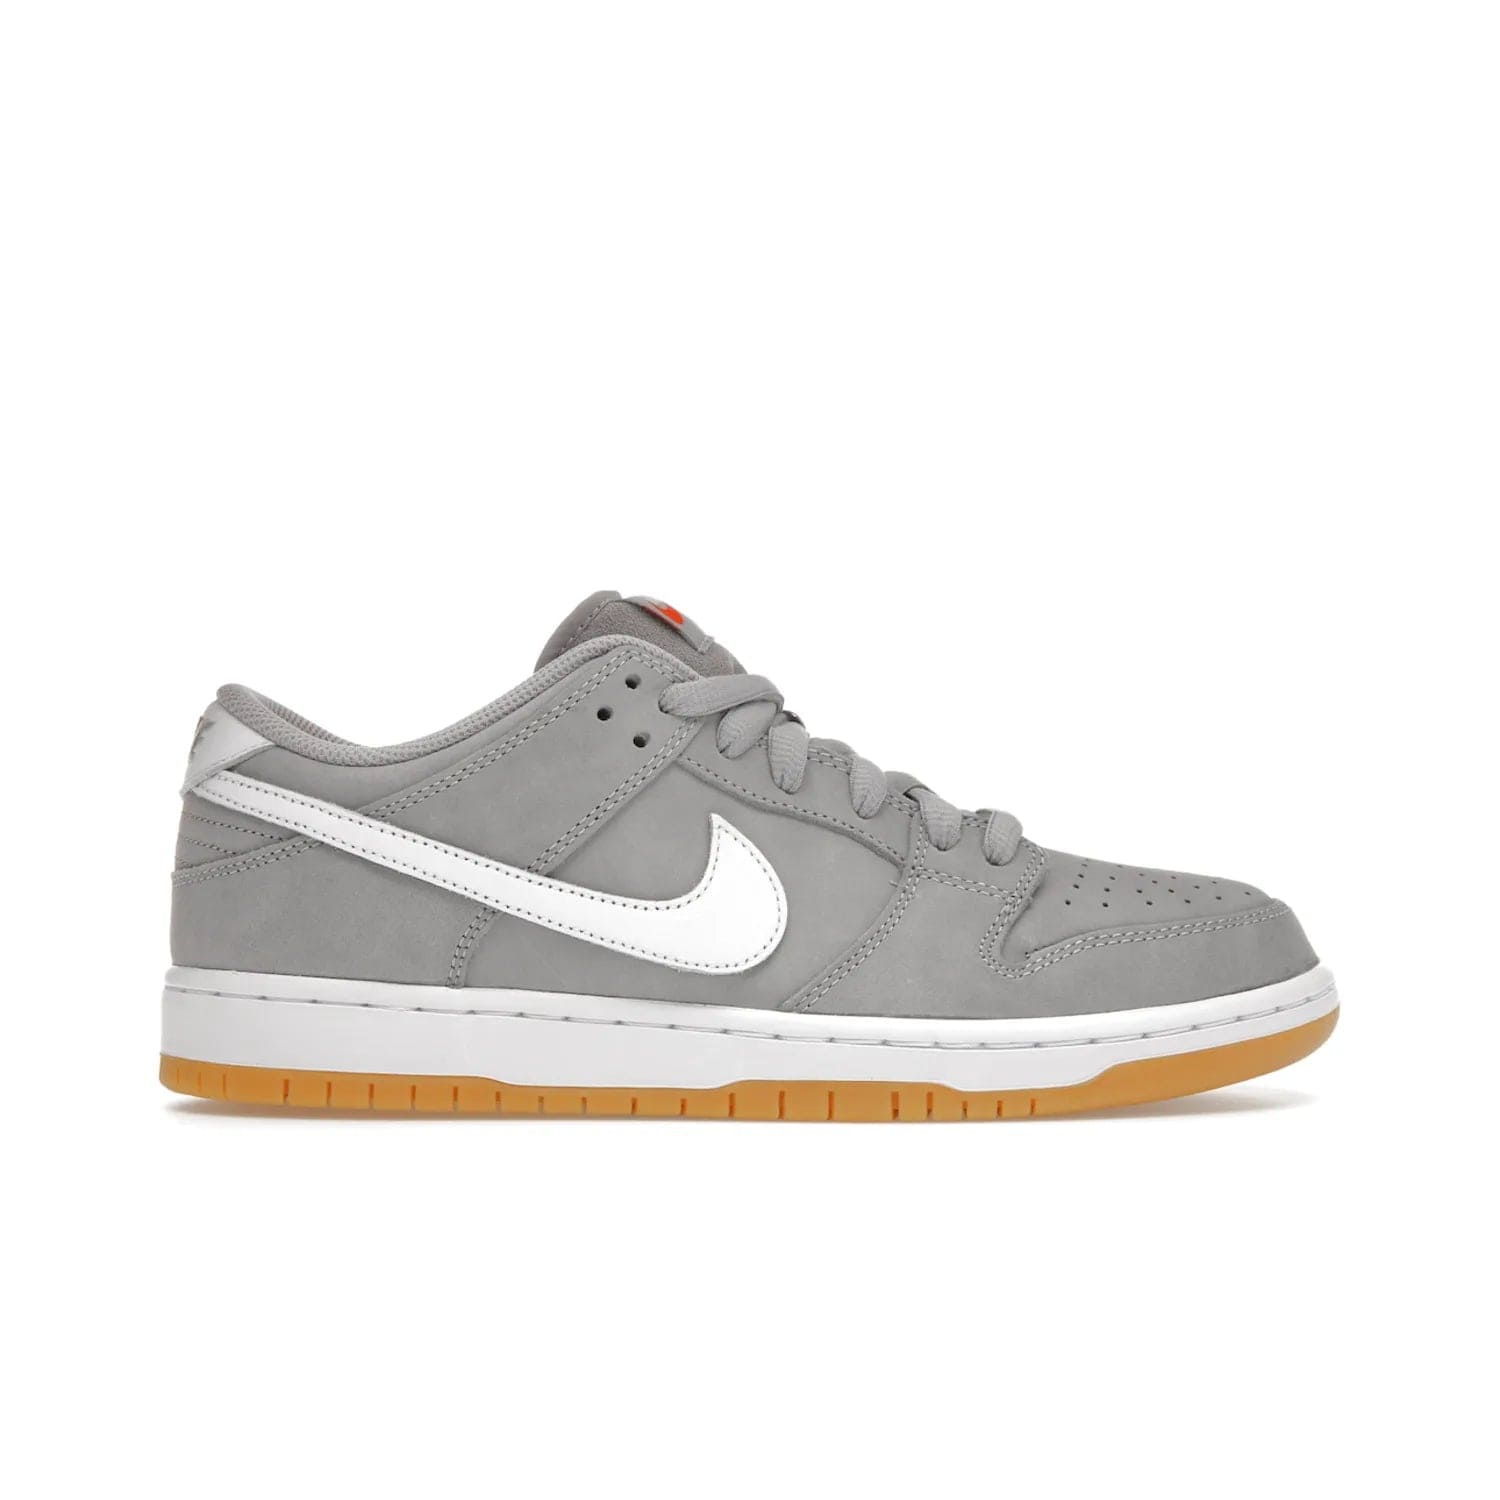 Nike SB Dunk Low Pro ISO Orange Label Wolf Grey Gum - Image 1 - Only at www.BallersClubKickz.com - Introducing Nike's SB Dunk Low Pro ISO Orange Label Wolf Grey Gum - a stylish shoe with a premium Wolf Grey upper, white leather Nike Swoosh, and an eye-catching gum outsole. With special Nike branding and packaging, this shoe adds a unique fashion statement. Out Feb. 24, 2023.